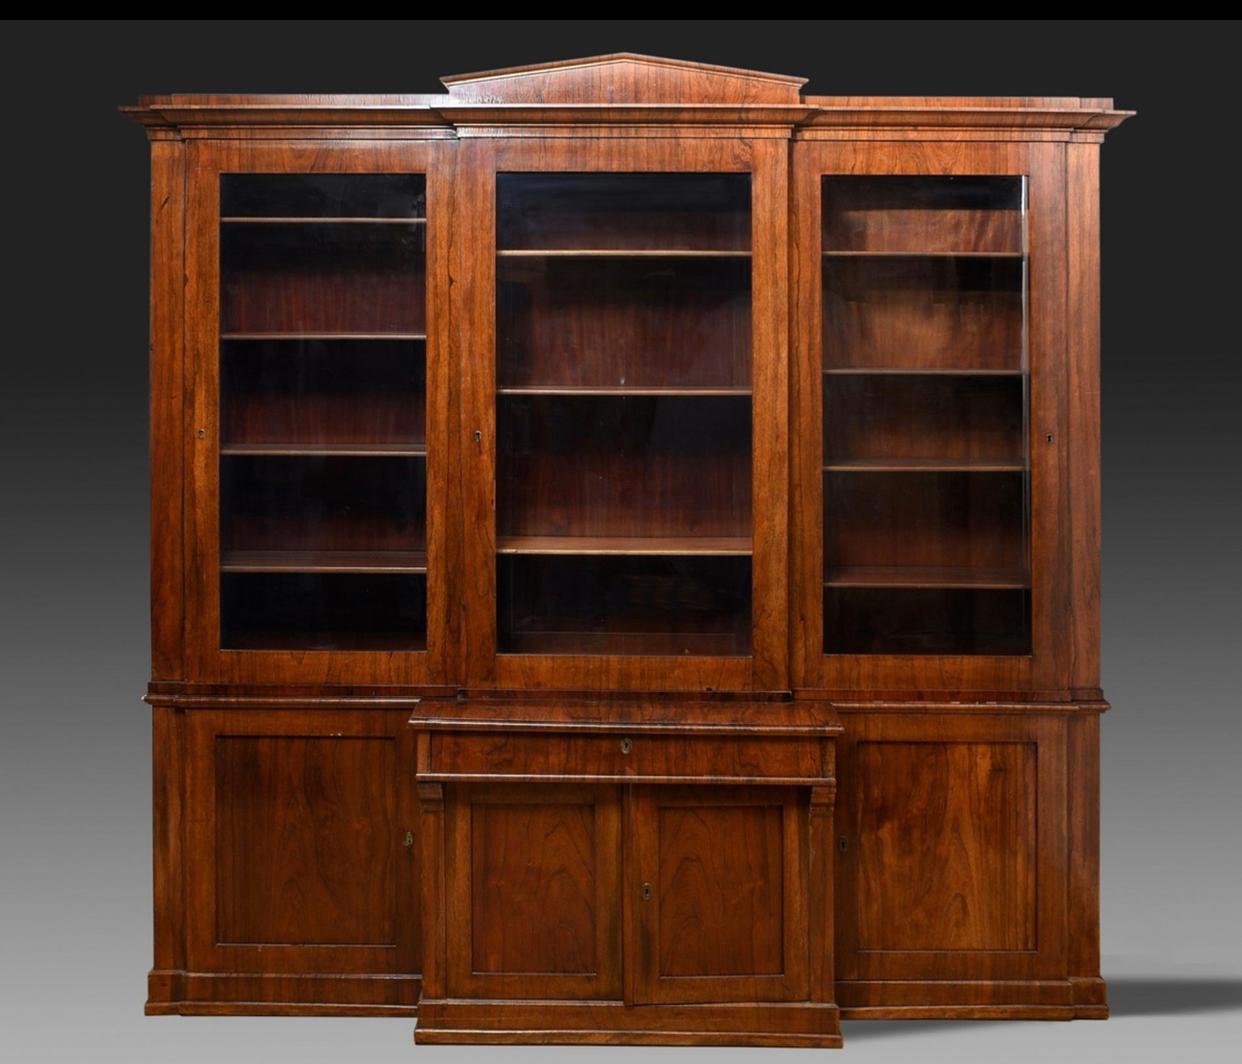 Mid-19th Century Bookcase
Northern Germany, Ca.1830

Library, Northern Germany 1830 Classic bookcase with a front under a pointed top and three glass sliding doors in the upper part and a drawer and a door in the lower part, northern German, circa